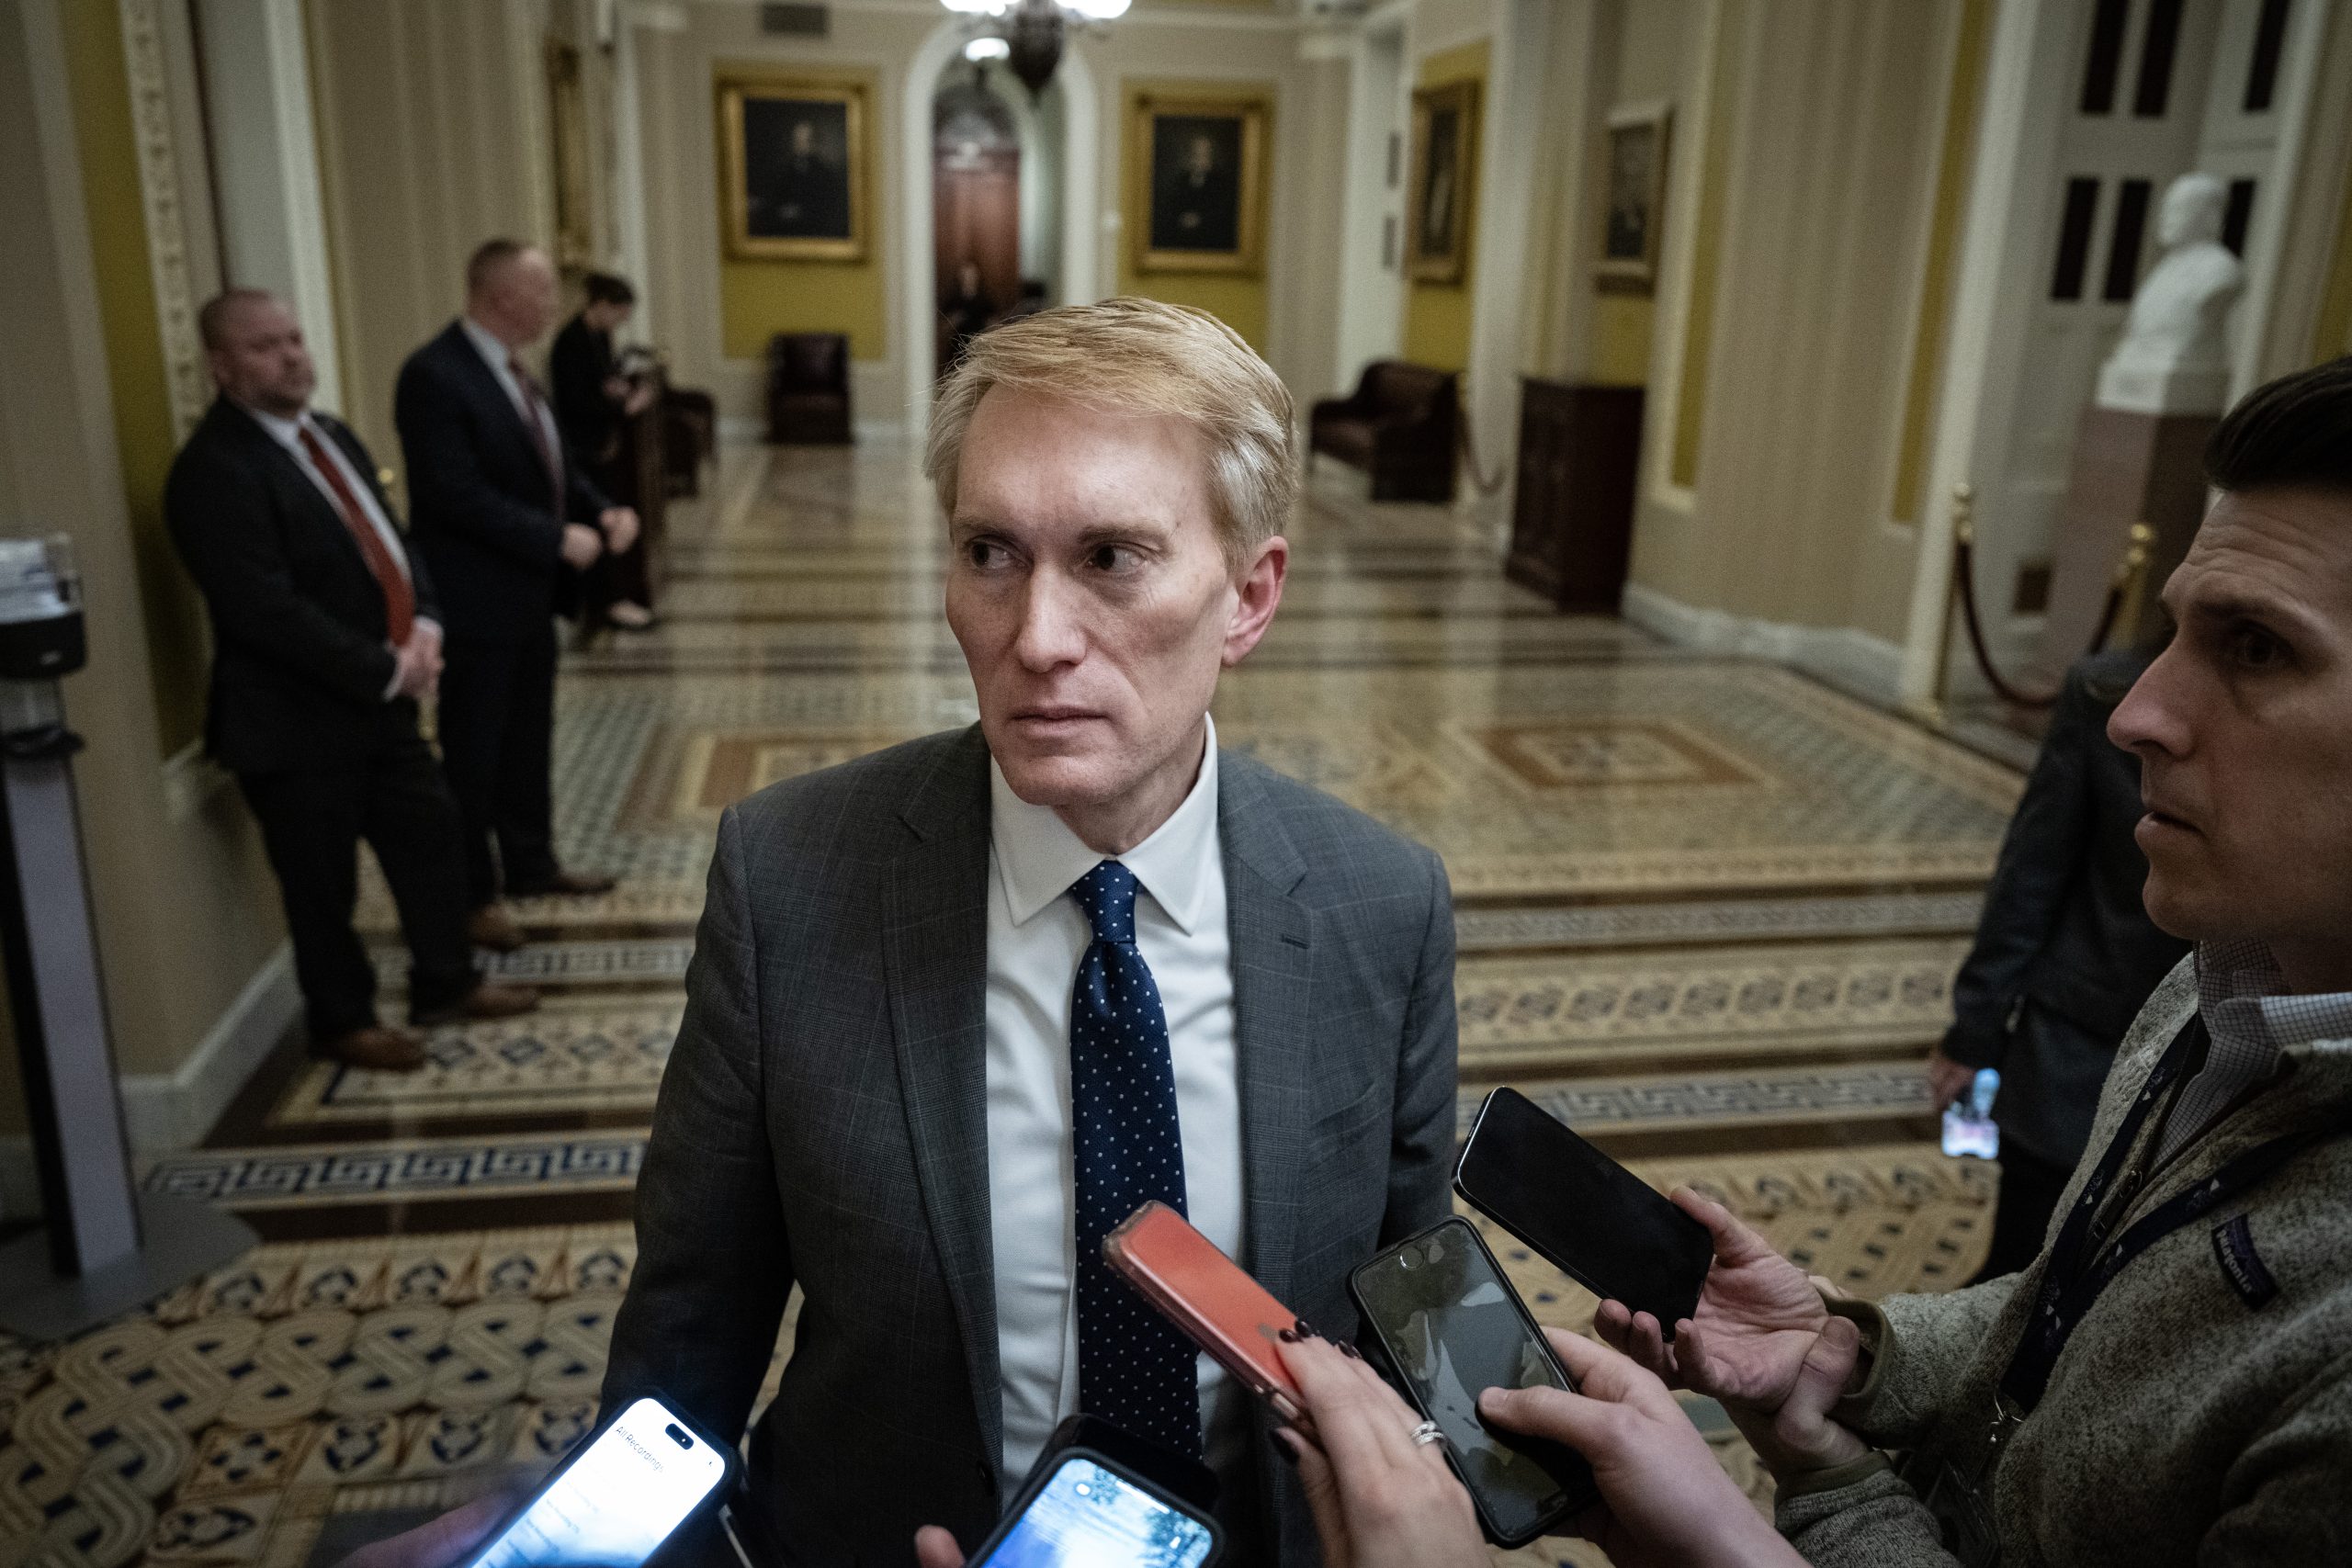 Lankford Gets The MAGA Treatment For Defying Trump And Legislating